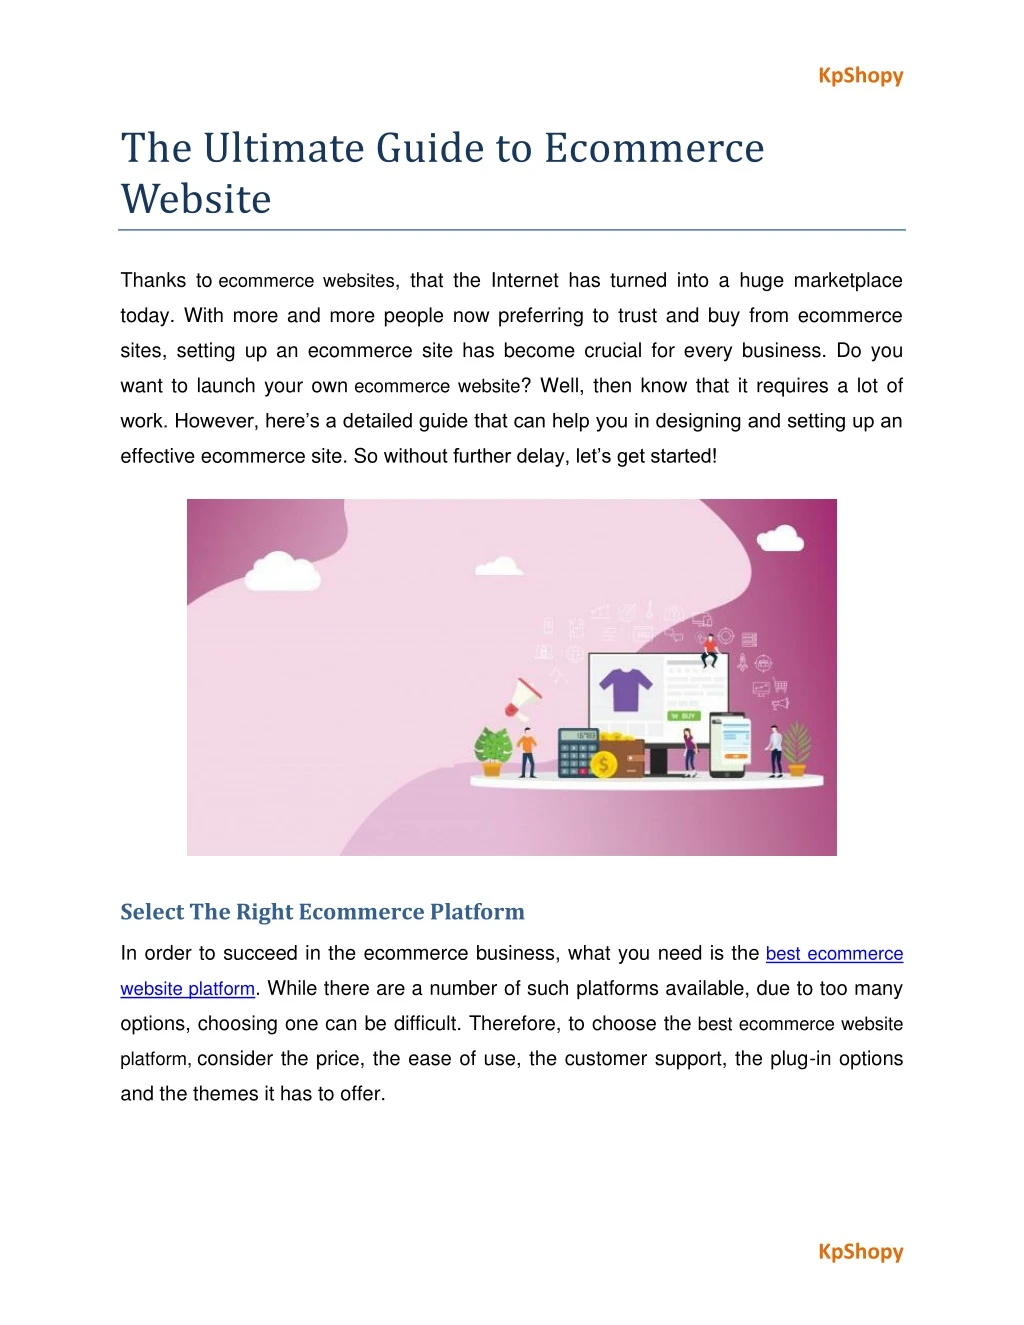 the ultimate guide to ecommerce website